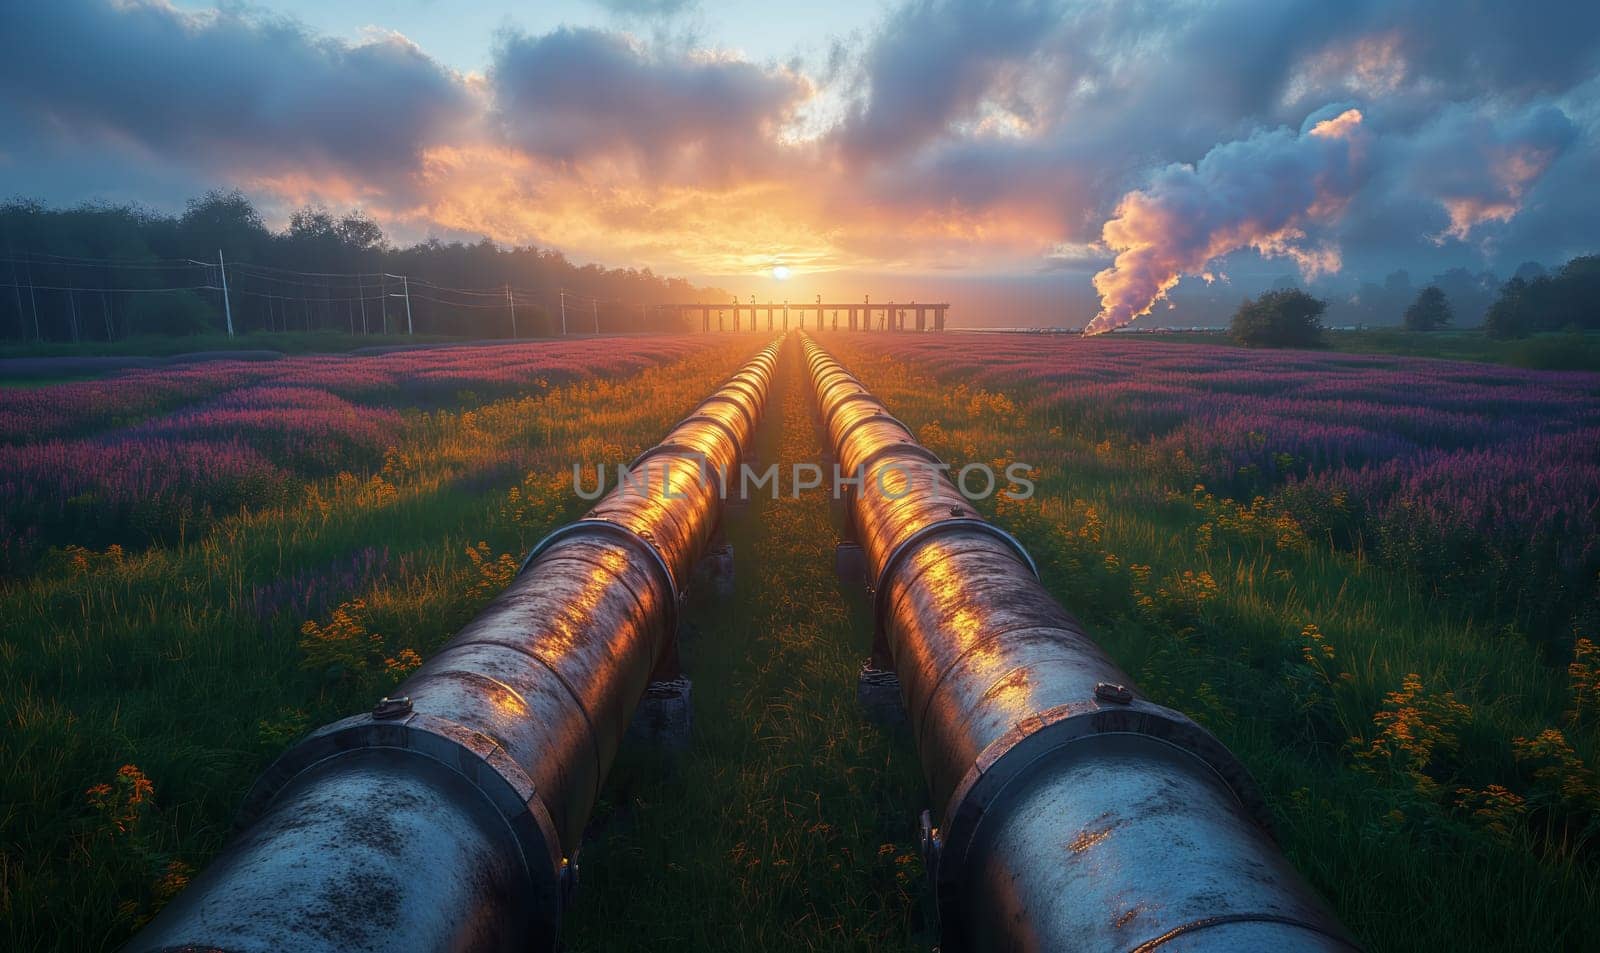 A large pipe stands in the middle of a vast field under the sky.